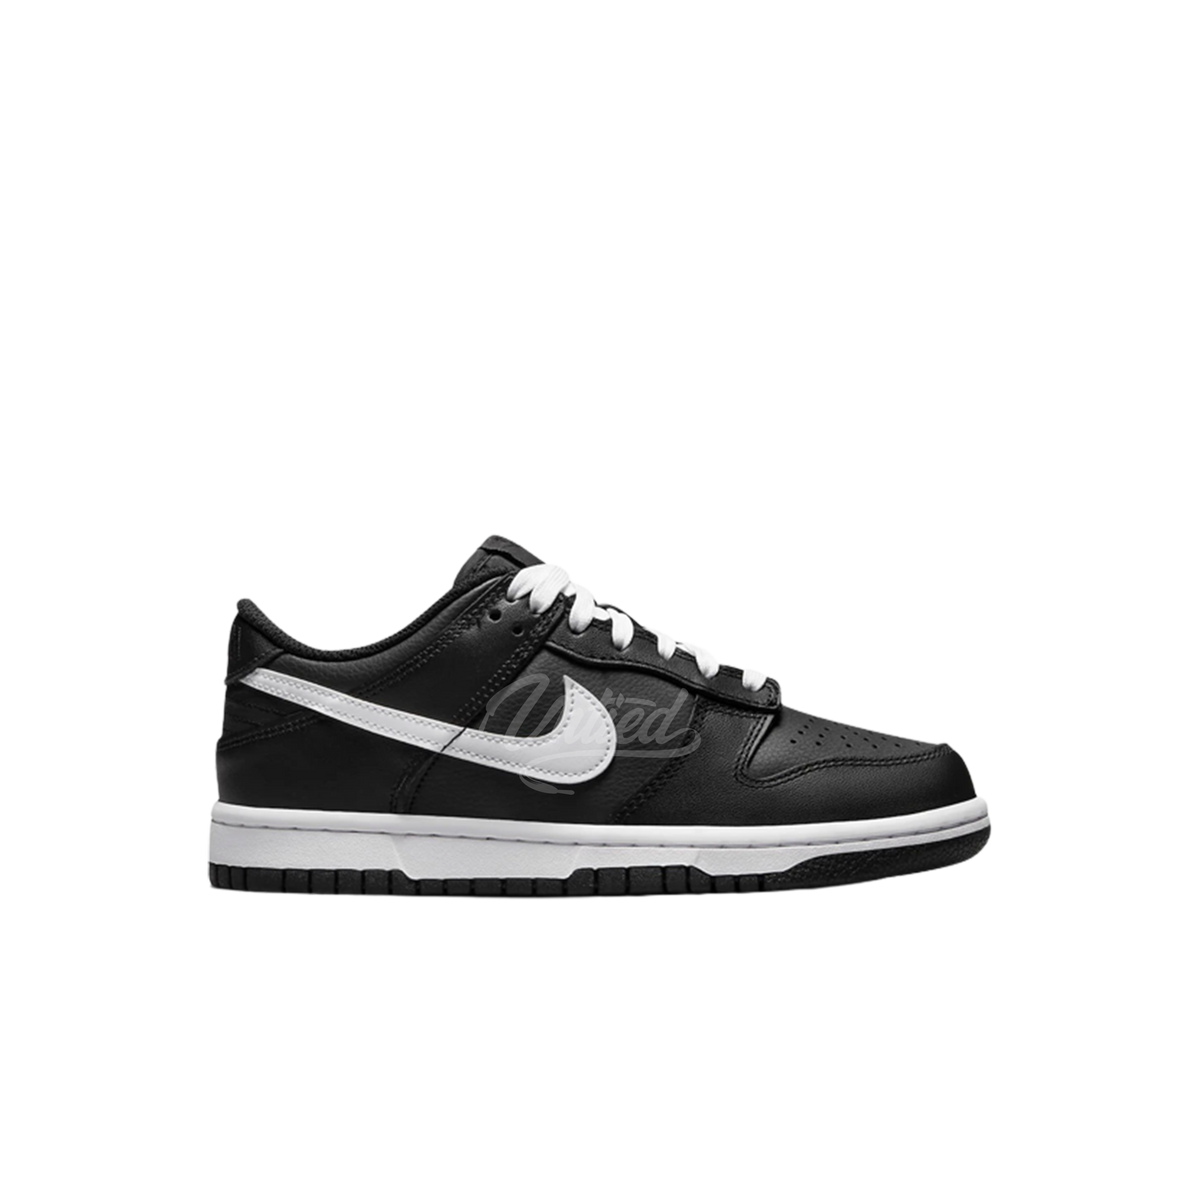 Nike Dunk Low "All Black/White" (GS)